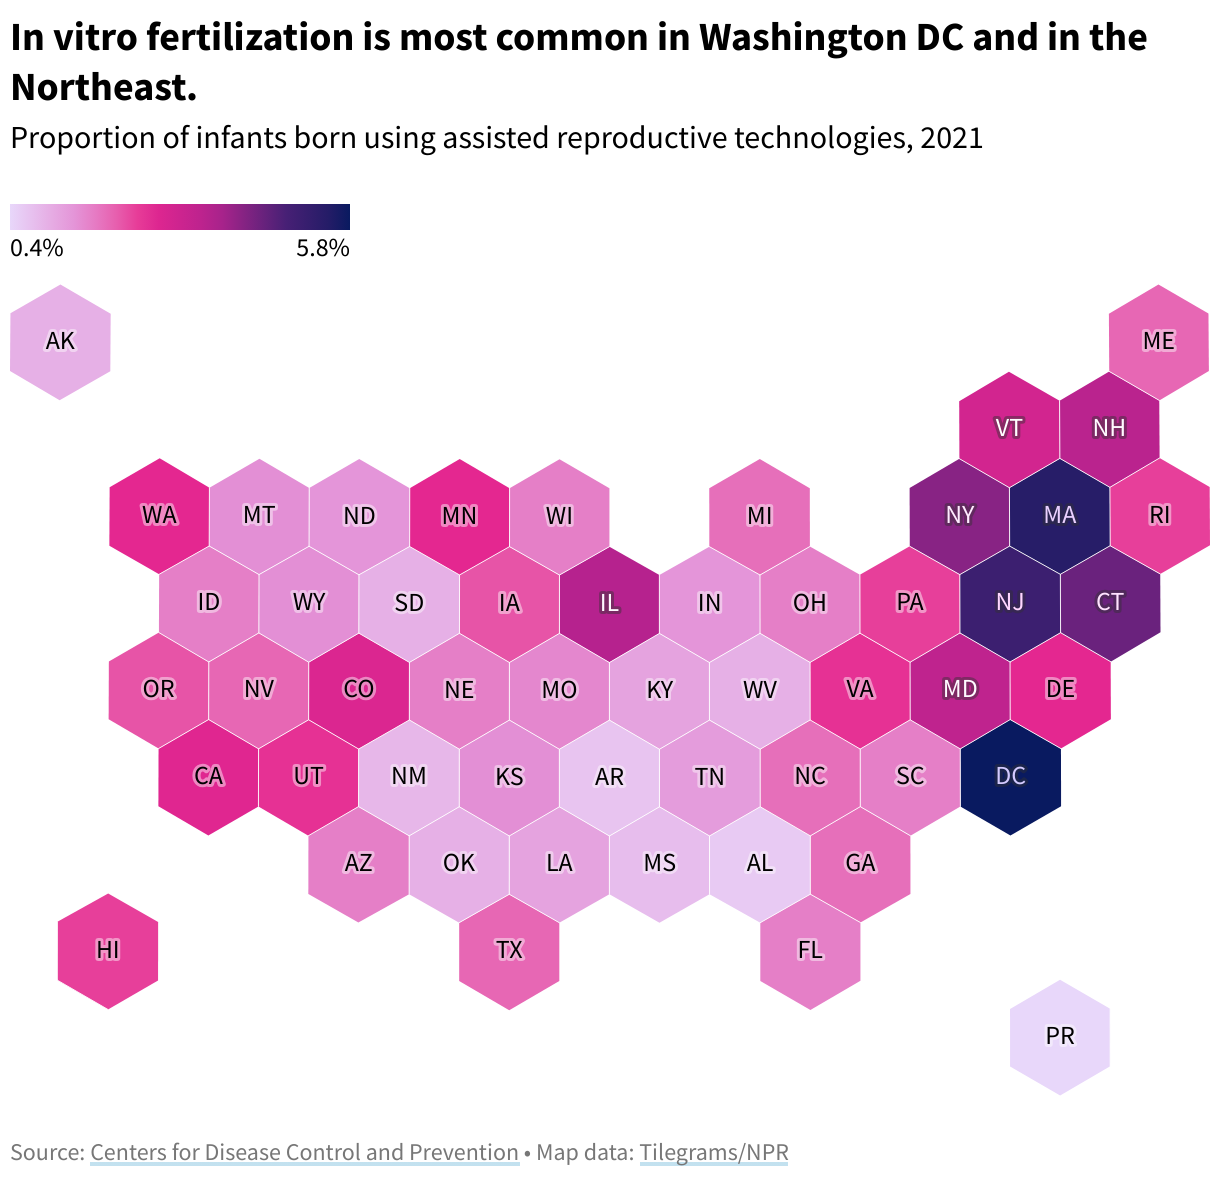 A hex map showing the proportion of infants born using assisted reproductive technologies by state, 2021. In vitro fertilization is most common in Washington DC and in the Northeast.